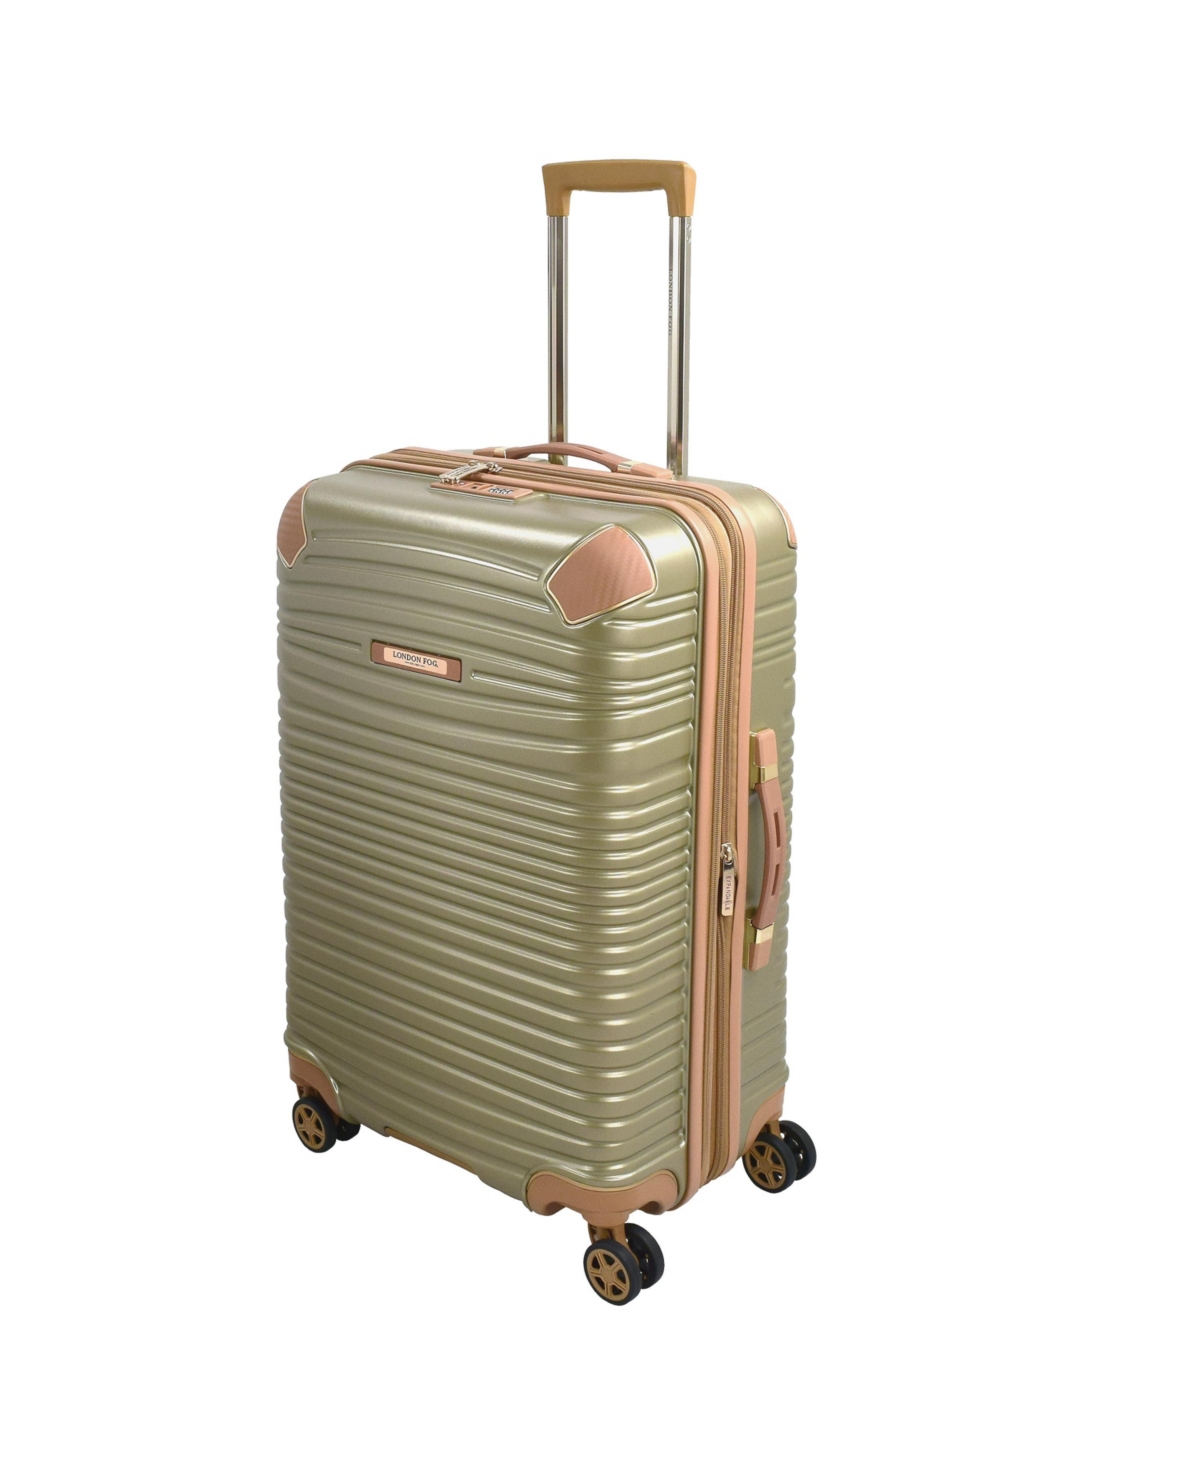 Closeout! London Fog Chelsea 25" Hardside Spinner Suitcase - Champagne